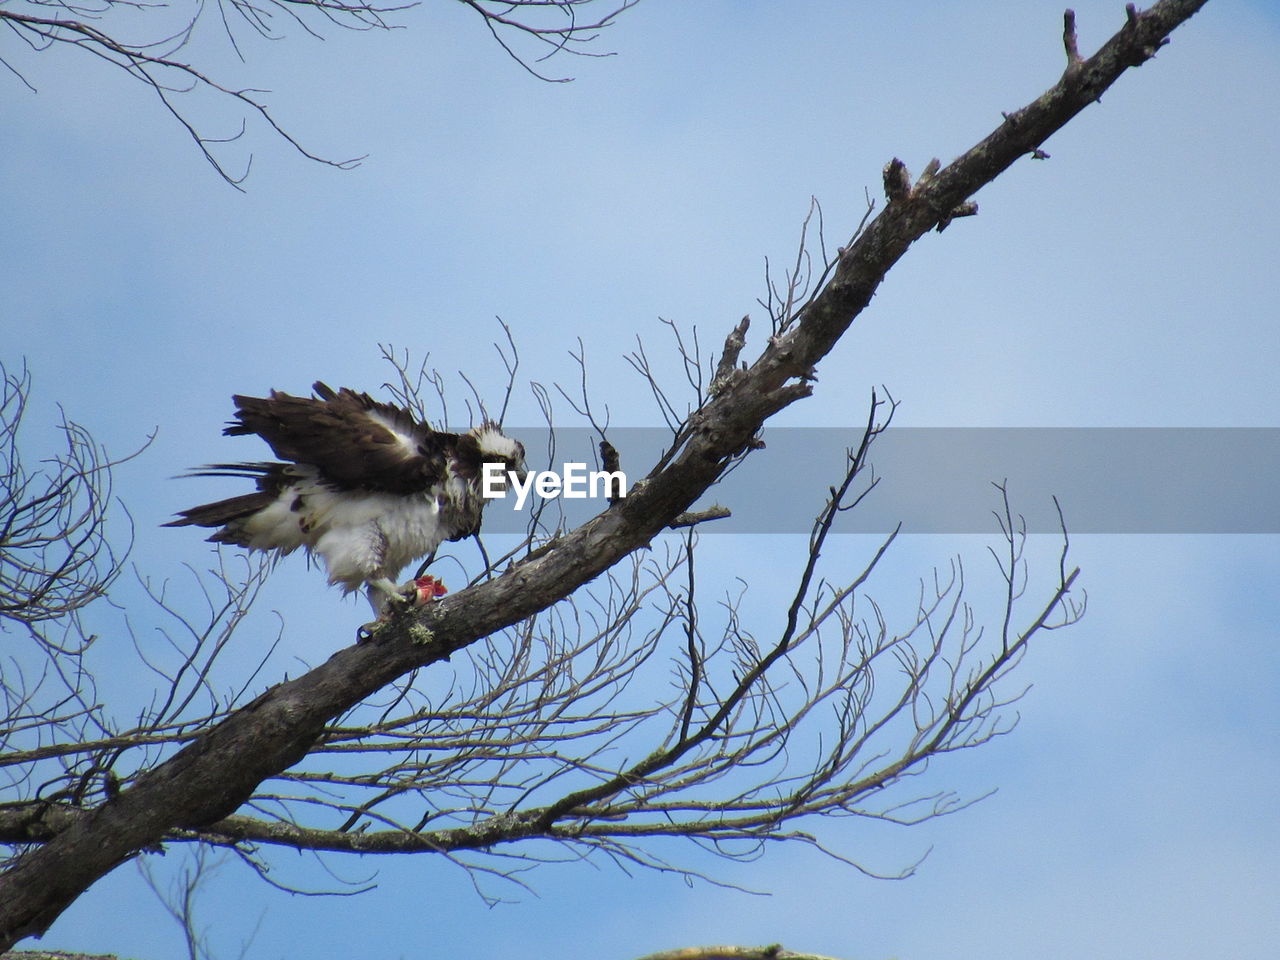 LOW ANGLE VIEW OF EAGLE PERCHING ON BARE TREE